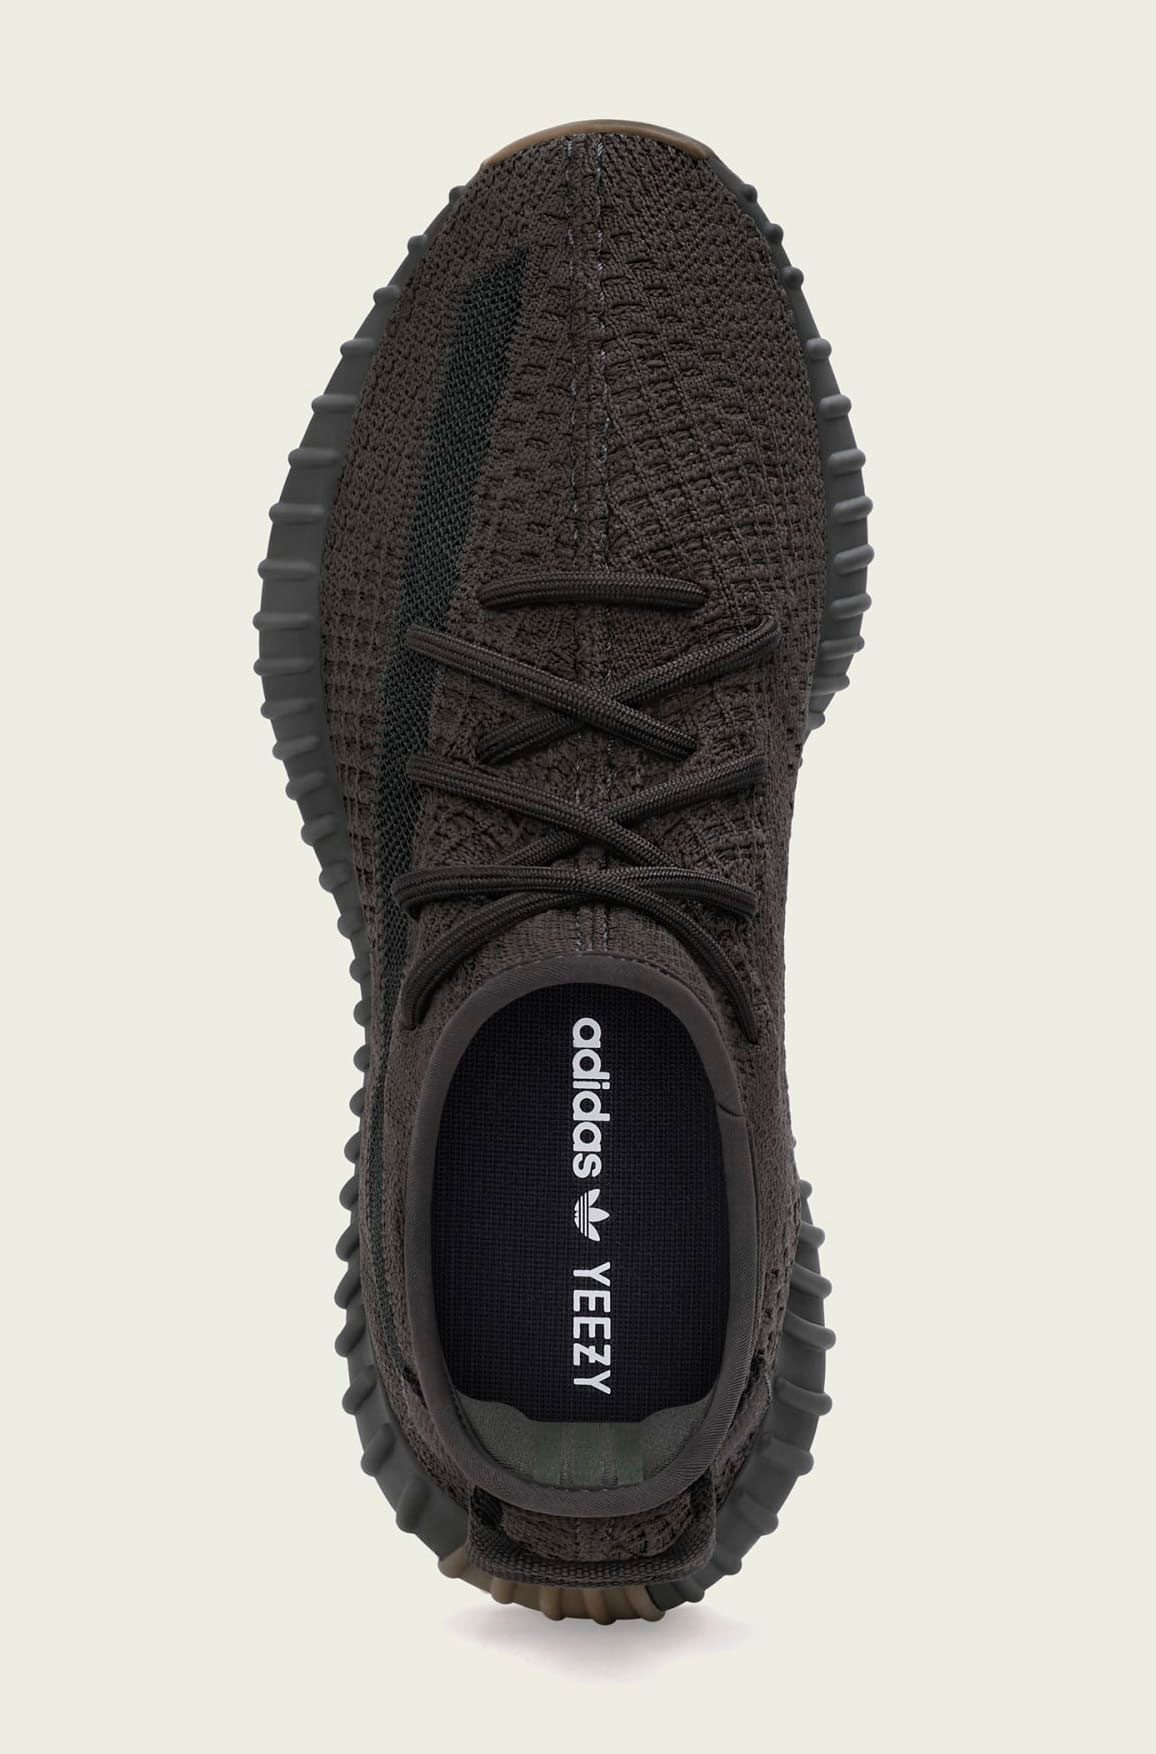 yeezy-boost-350-v2-cinder-release-date-price-4